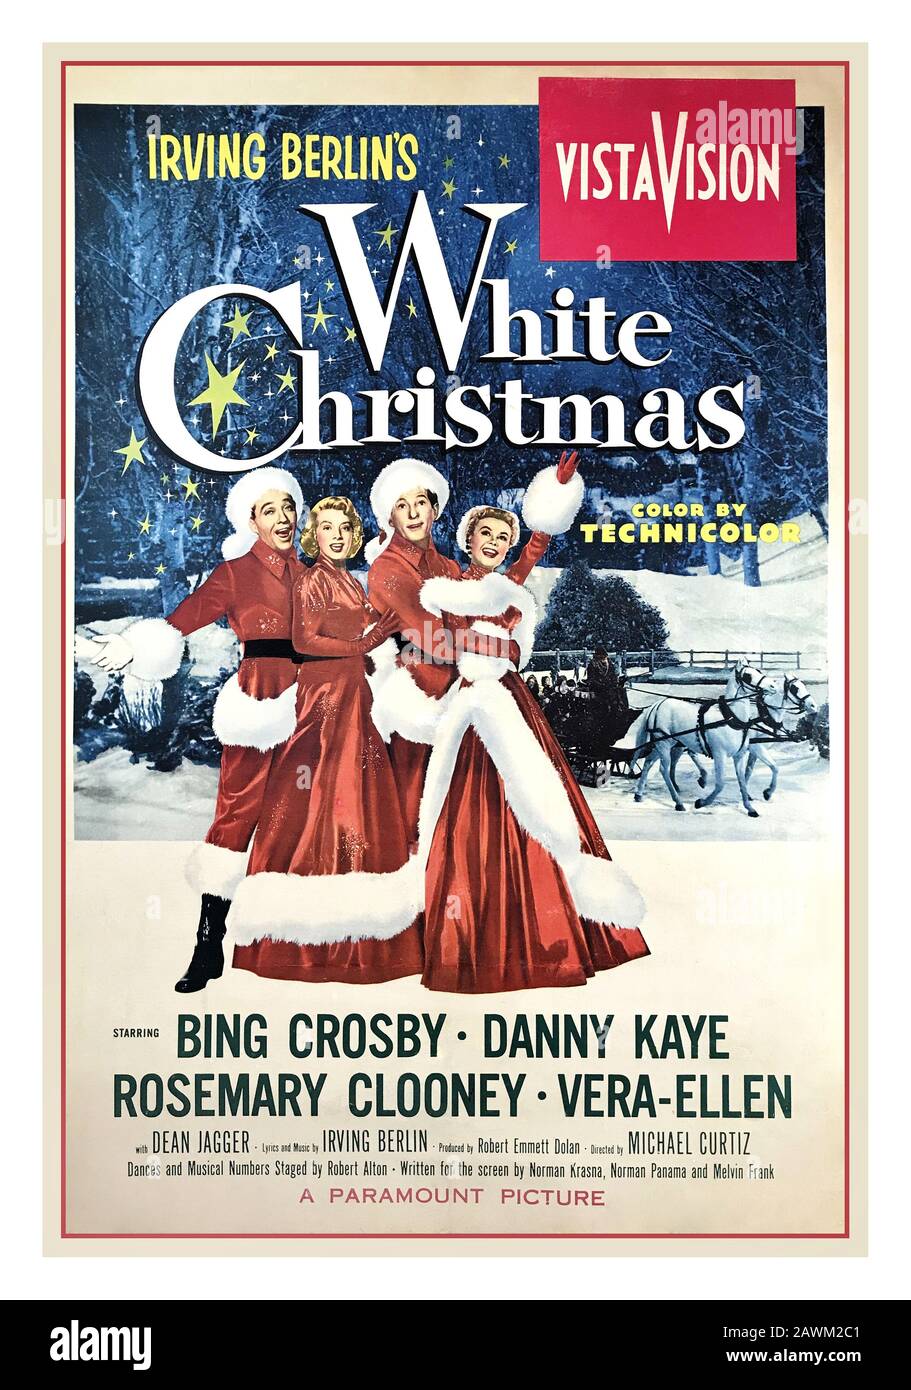 WHITE CHRISTMAS BING CROSBY Vintage Movie Poster for Irving Berlin’s White Christmas (1954) starring Bing Crosby, Danny Kaye, Rosemary Clooney, Vera-Ellen, Dean Jagger, Mary Wickes, John Brascia, Anne Whitfield, Bea Allen, Directed by Michael Curtiz Stock Photo